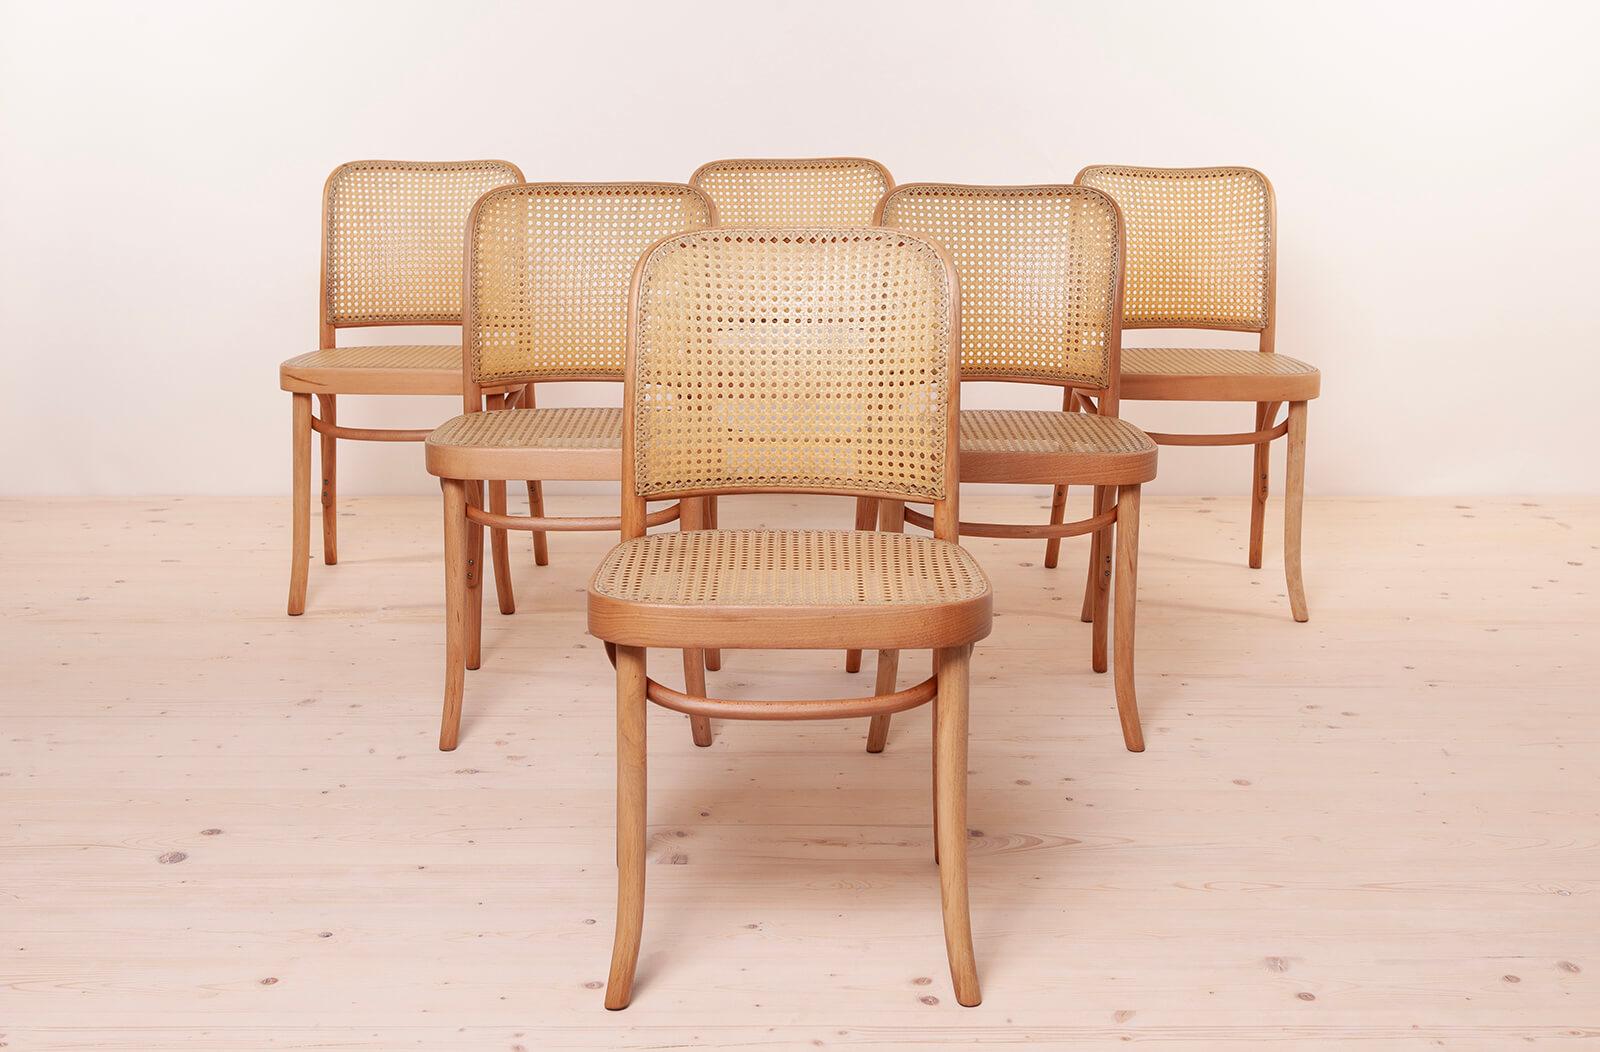 This this set of six exquisite dining chairs was crafted by renowned designer Josef Hoffmann and brought to life by the prestigious Thonet brand, however production origin of this particular set remains unknown. Known as model number 811 by Josef